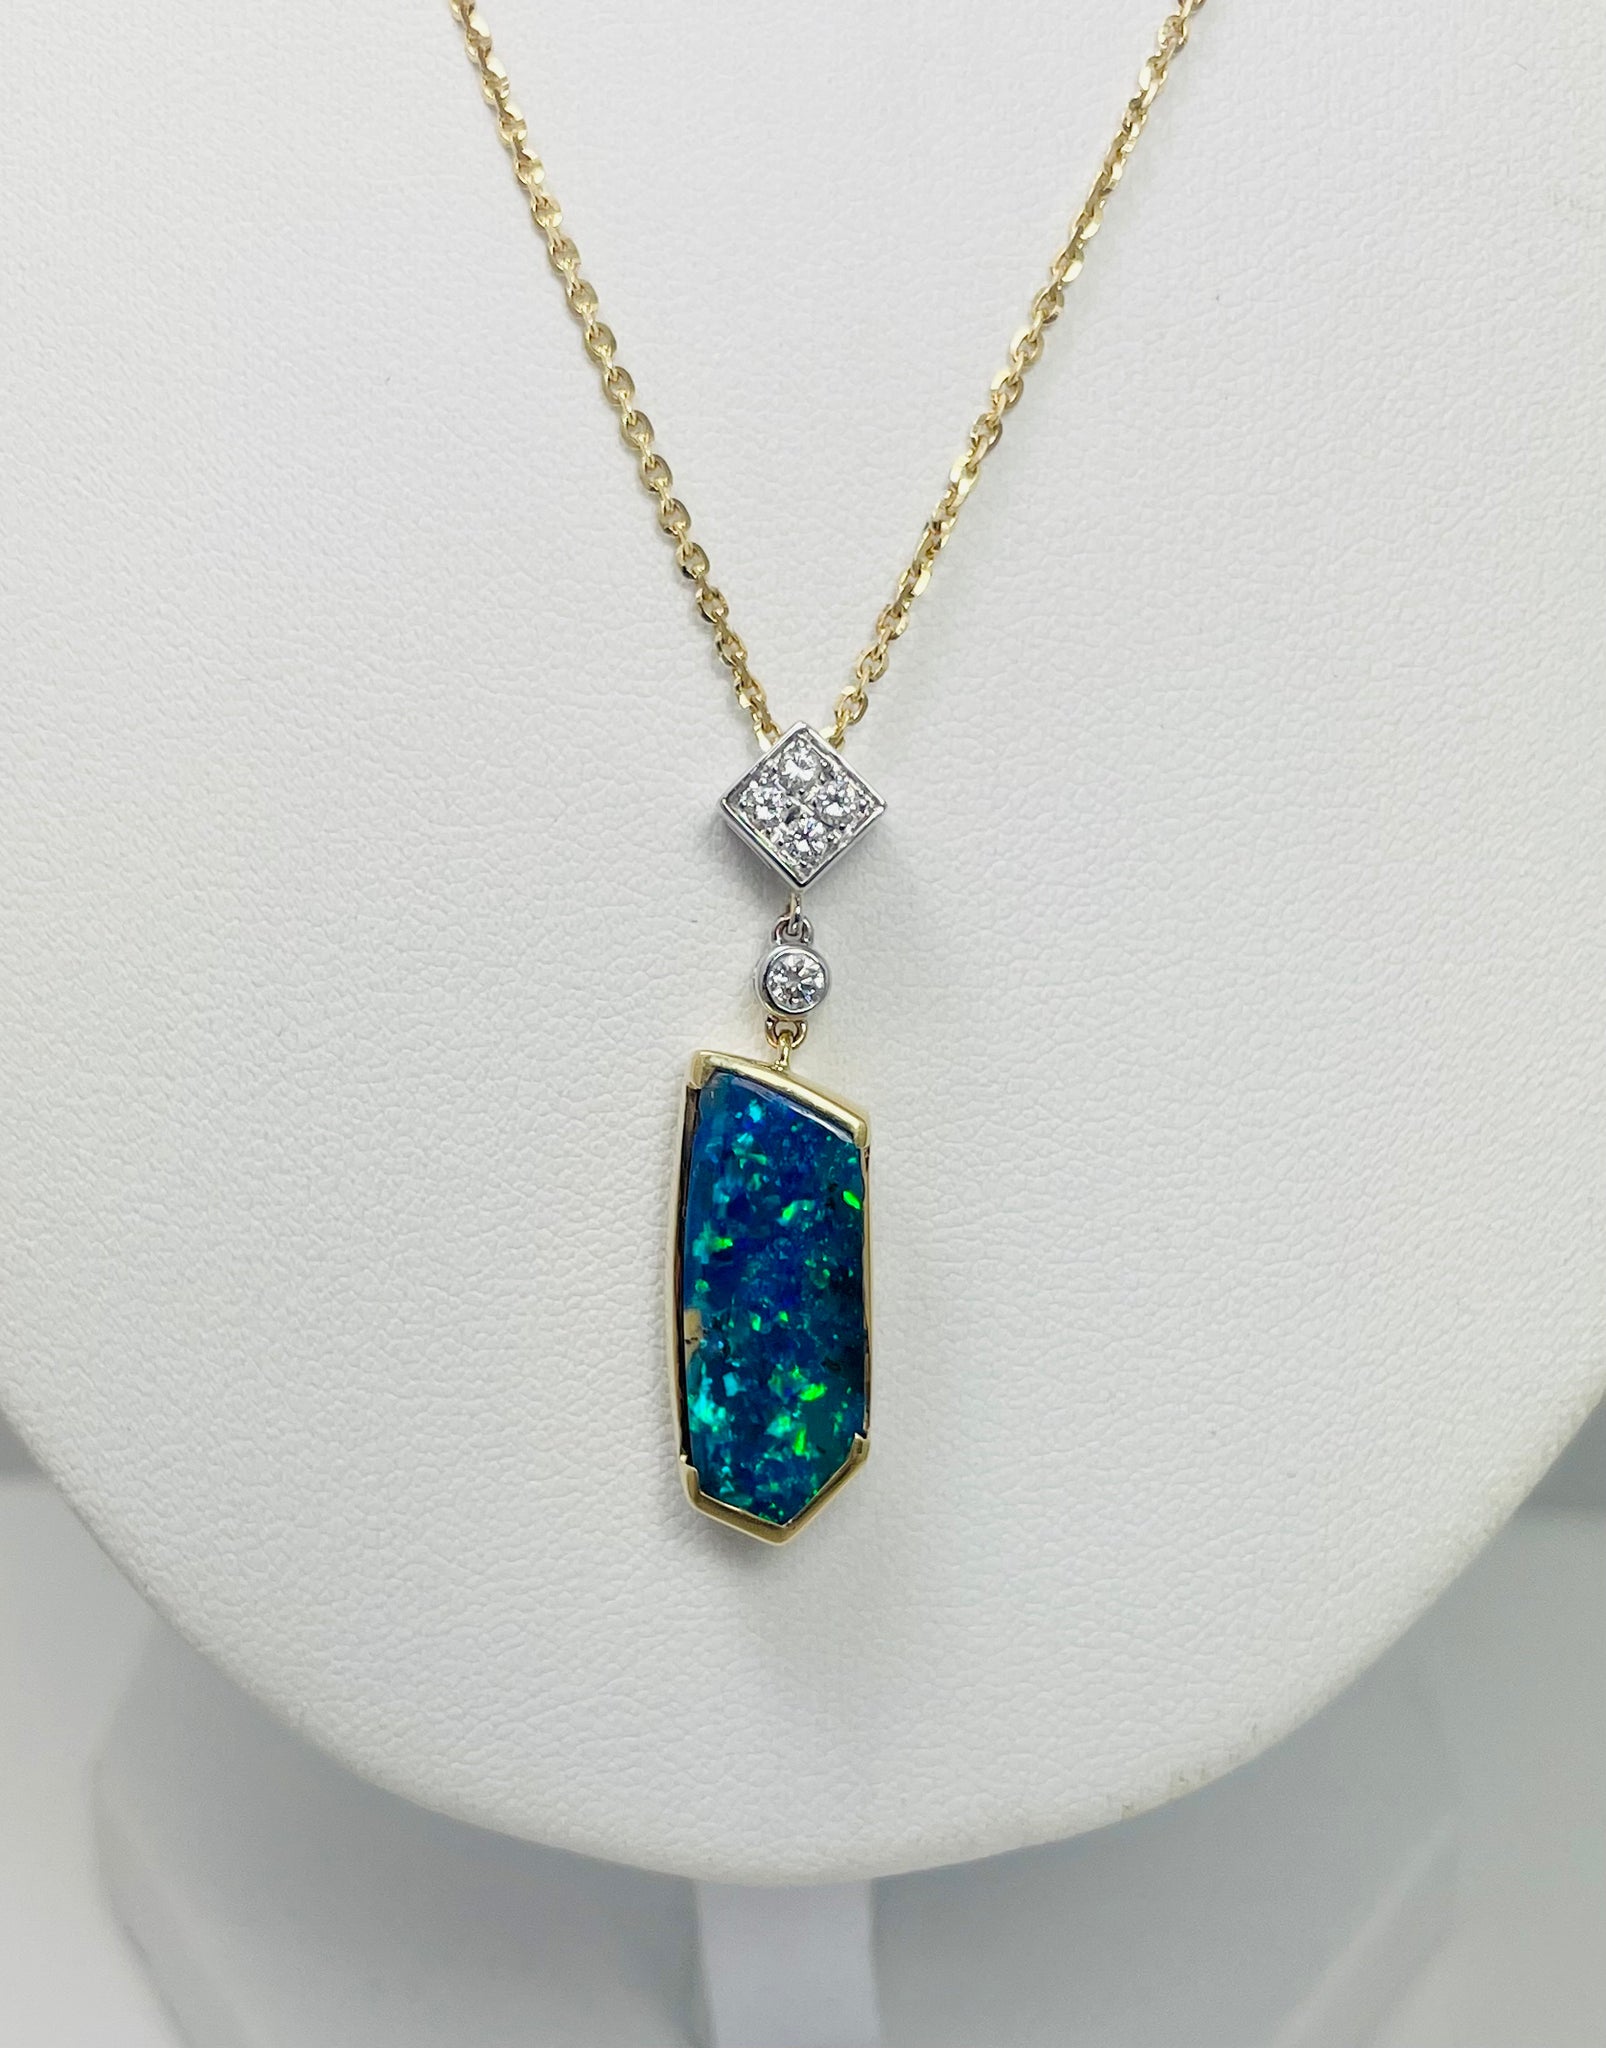 New! 5.51ct Natural Black Opal Diamond 18" 14k Yellow Gold Necklace